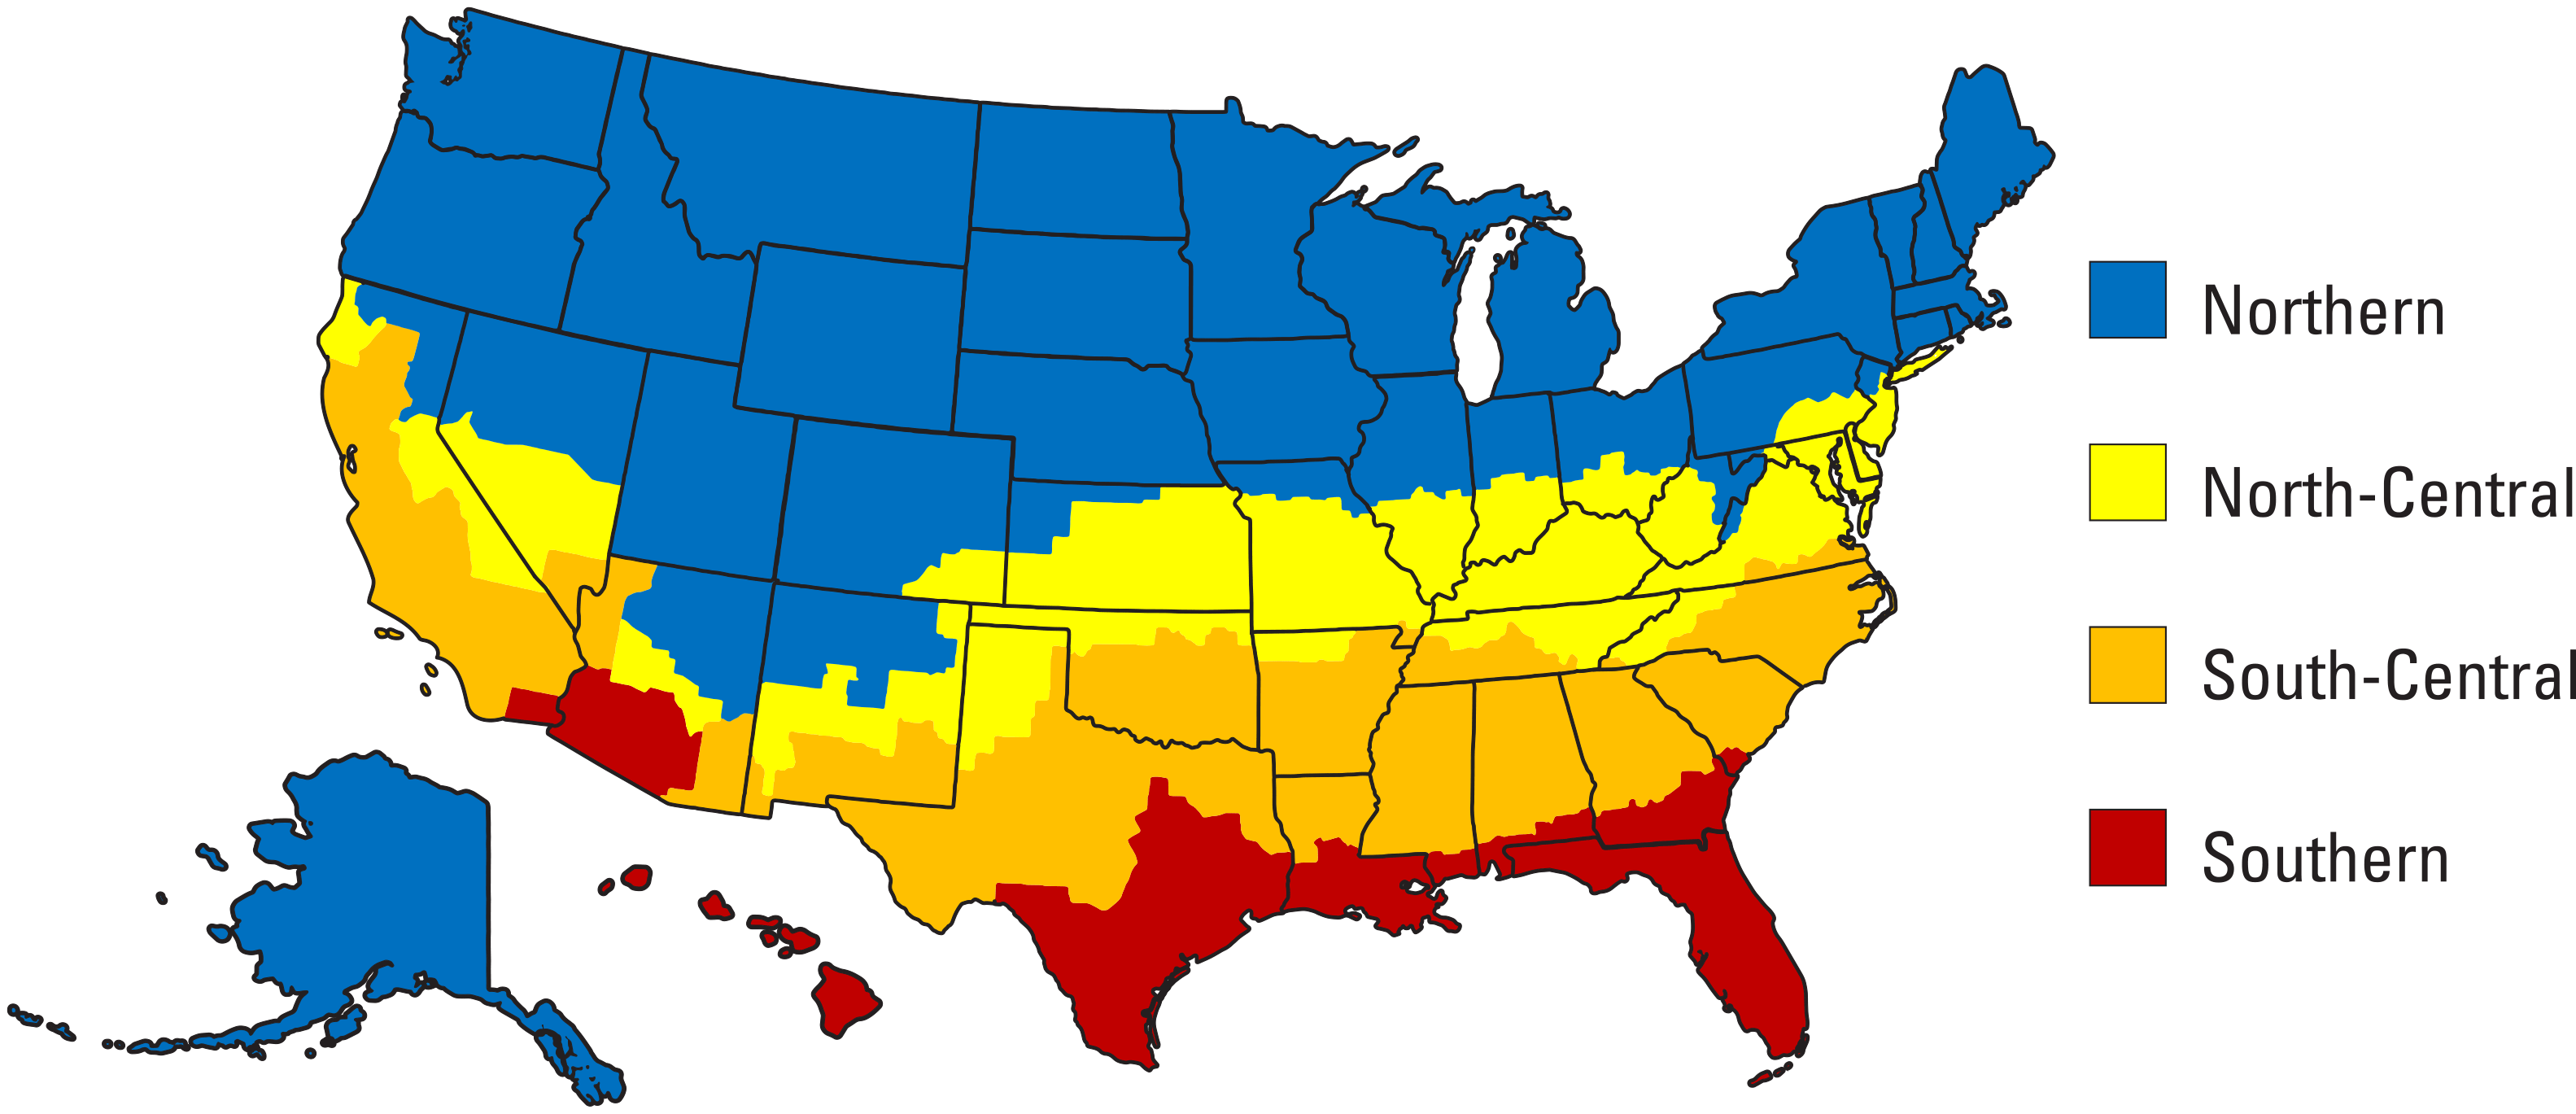 Climate zone map of the US